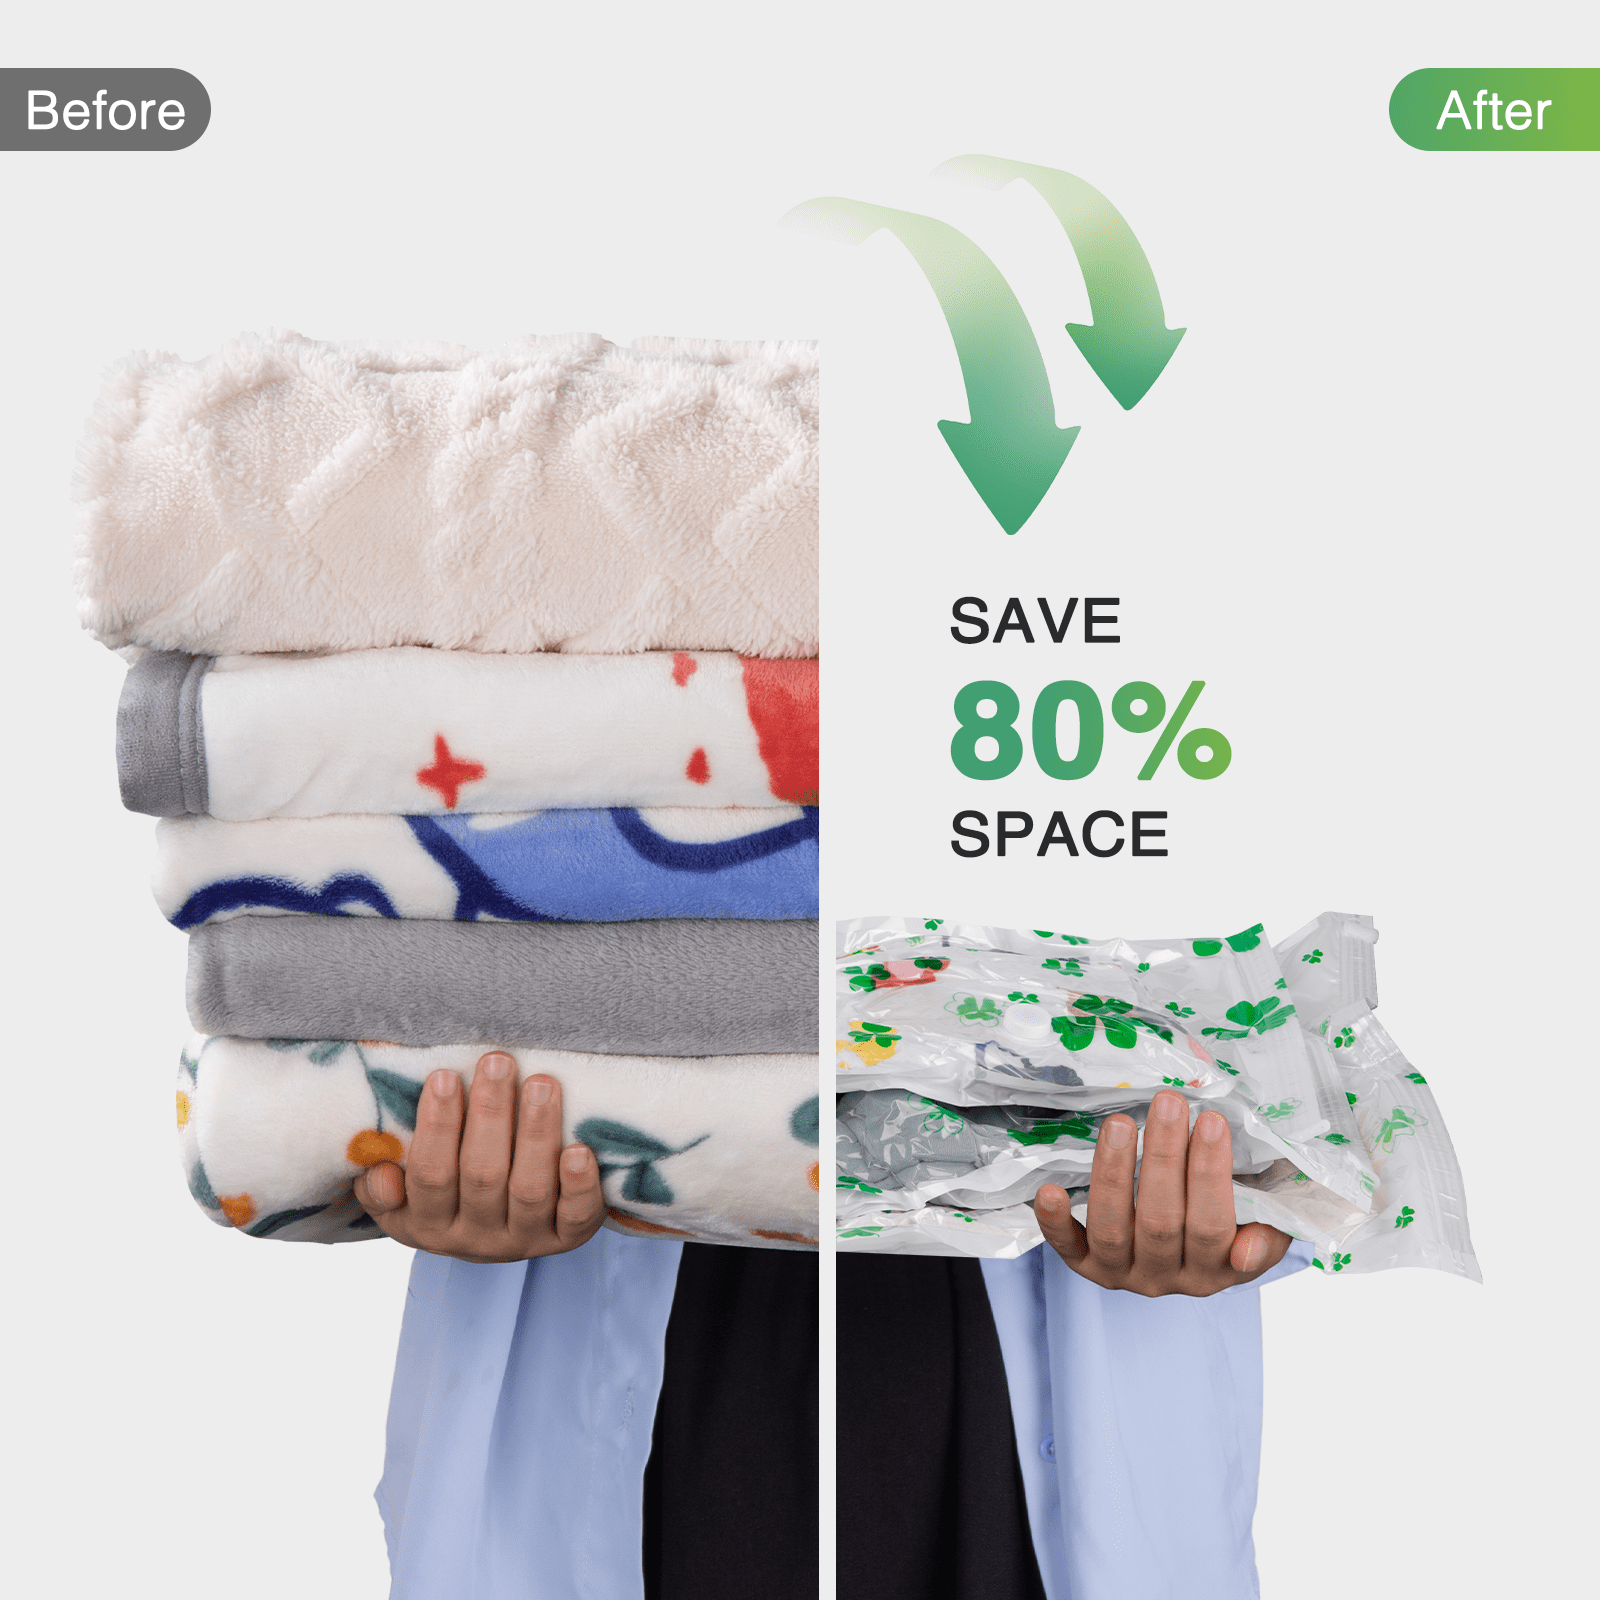 Vodiver vacuum storage bags Save 80% on Clothes Storage Space,Premium  Vacuum Sealer Bag for organizer, Blankets, Bedding, Clothing,Compression  Seal